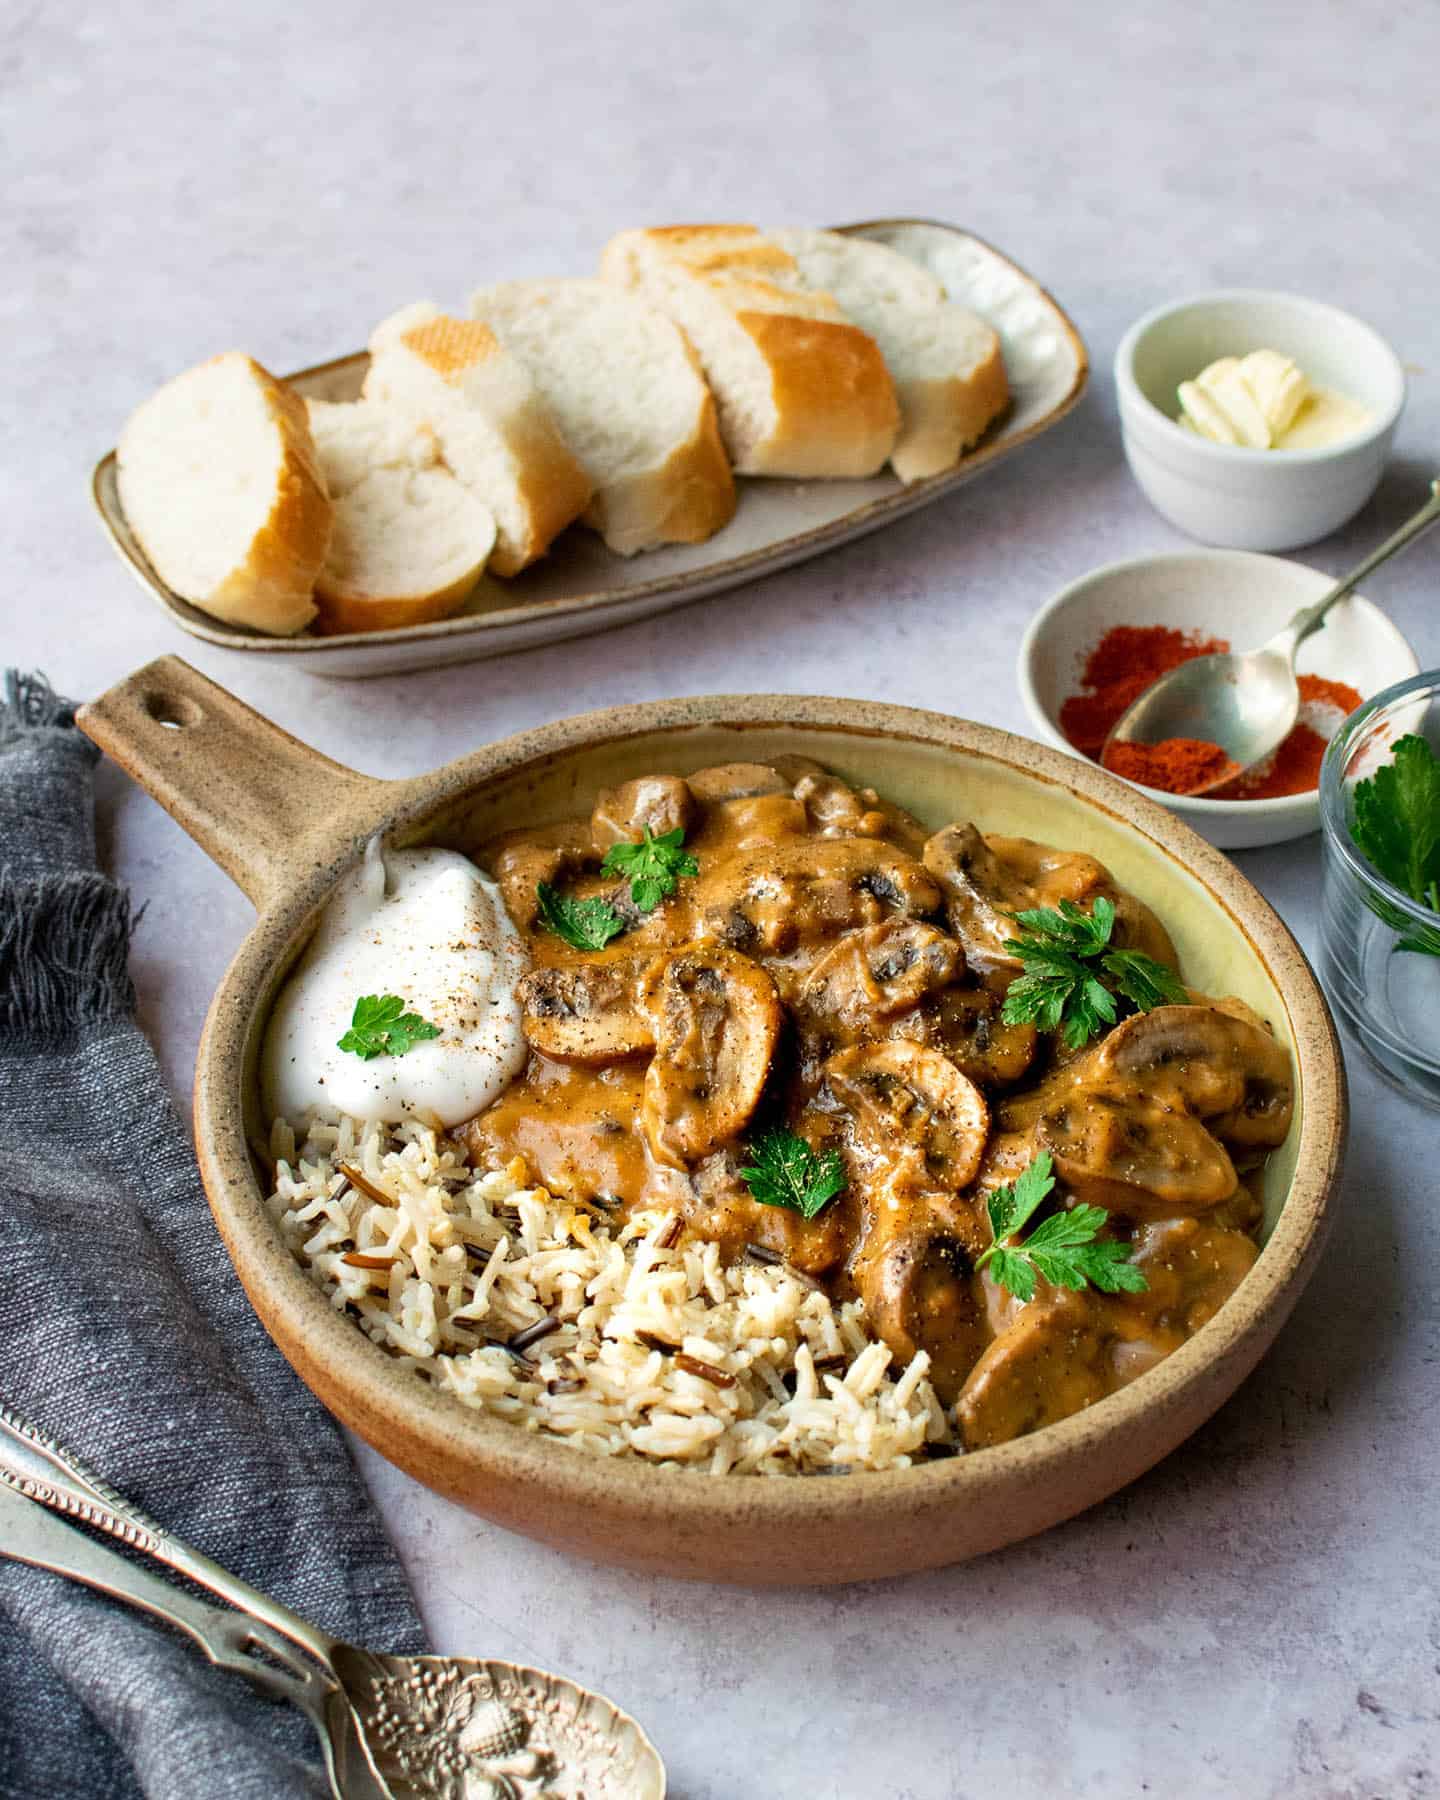 A bowl of wild rice and mushroom stroganoff. There's a plate of slices of crusty bread, as well as some bowls of spices and herbs surrounding it.